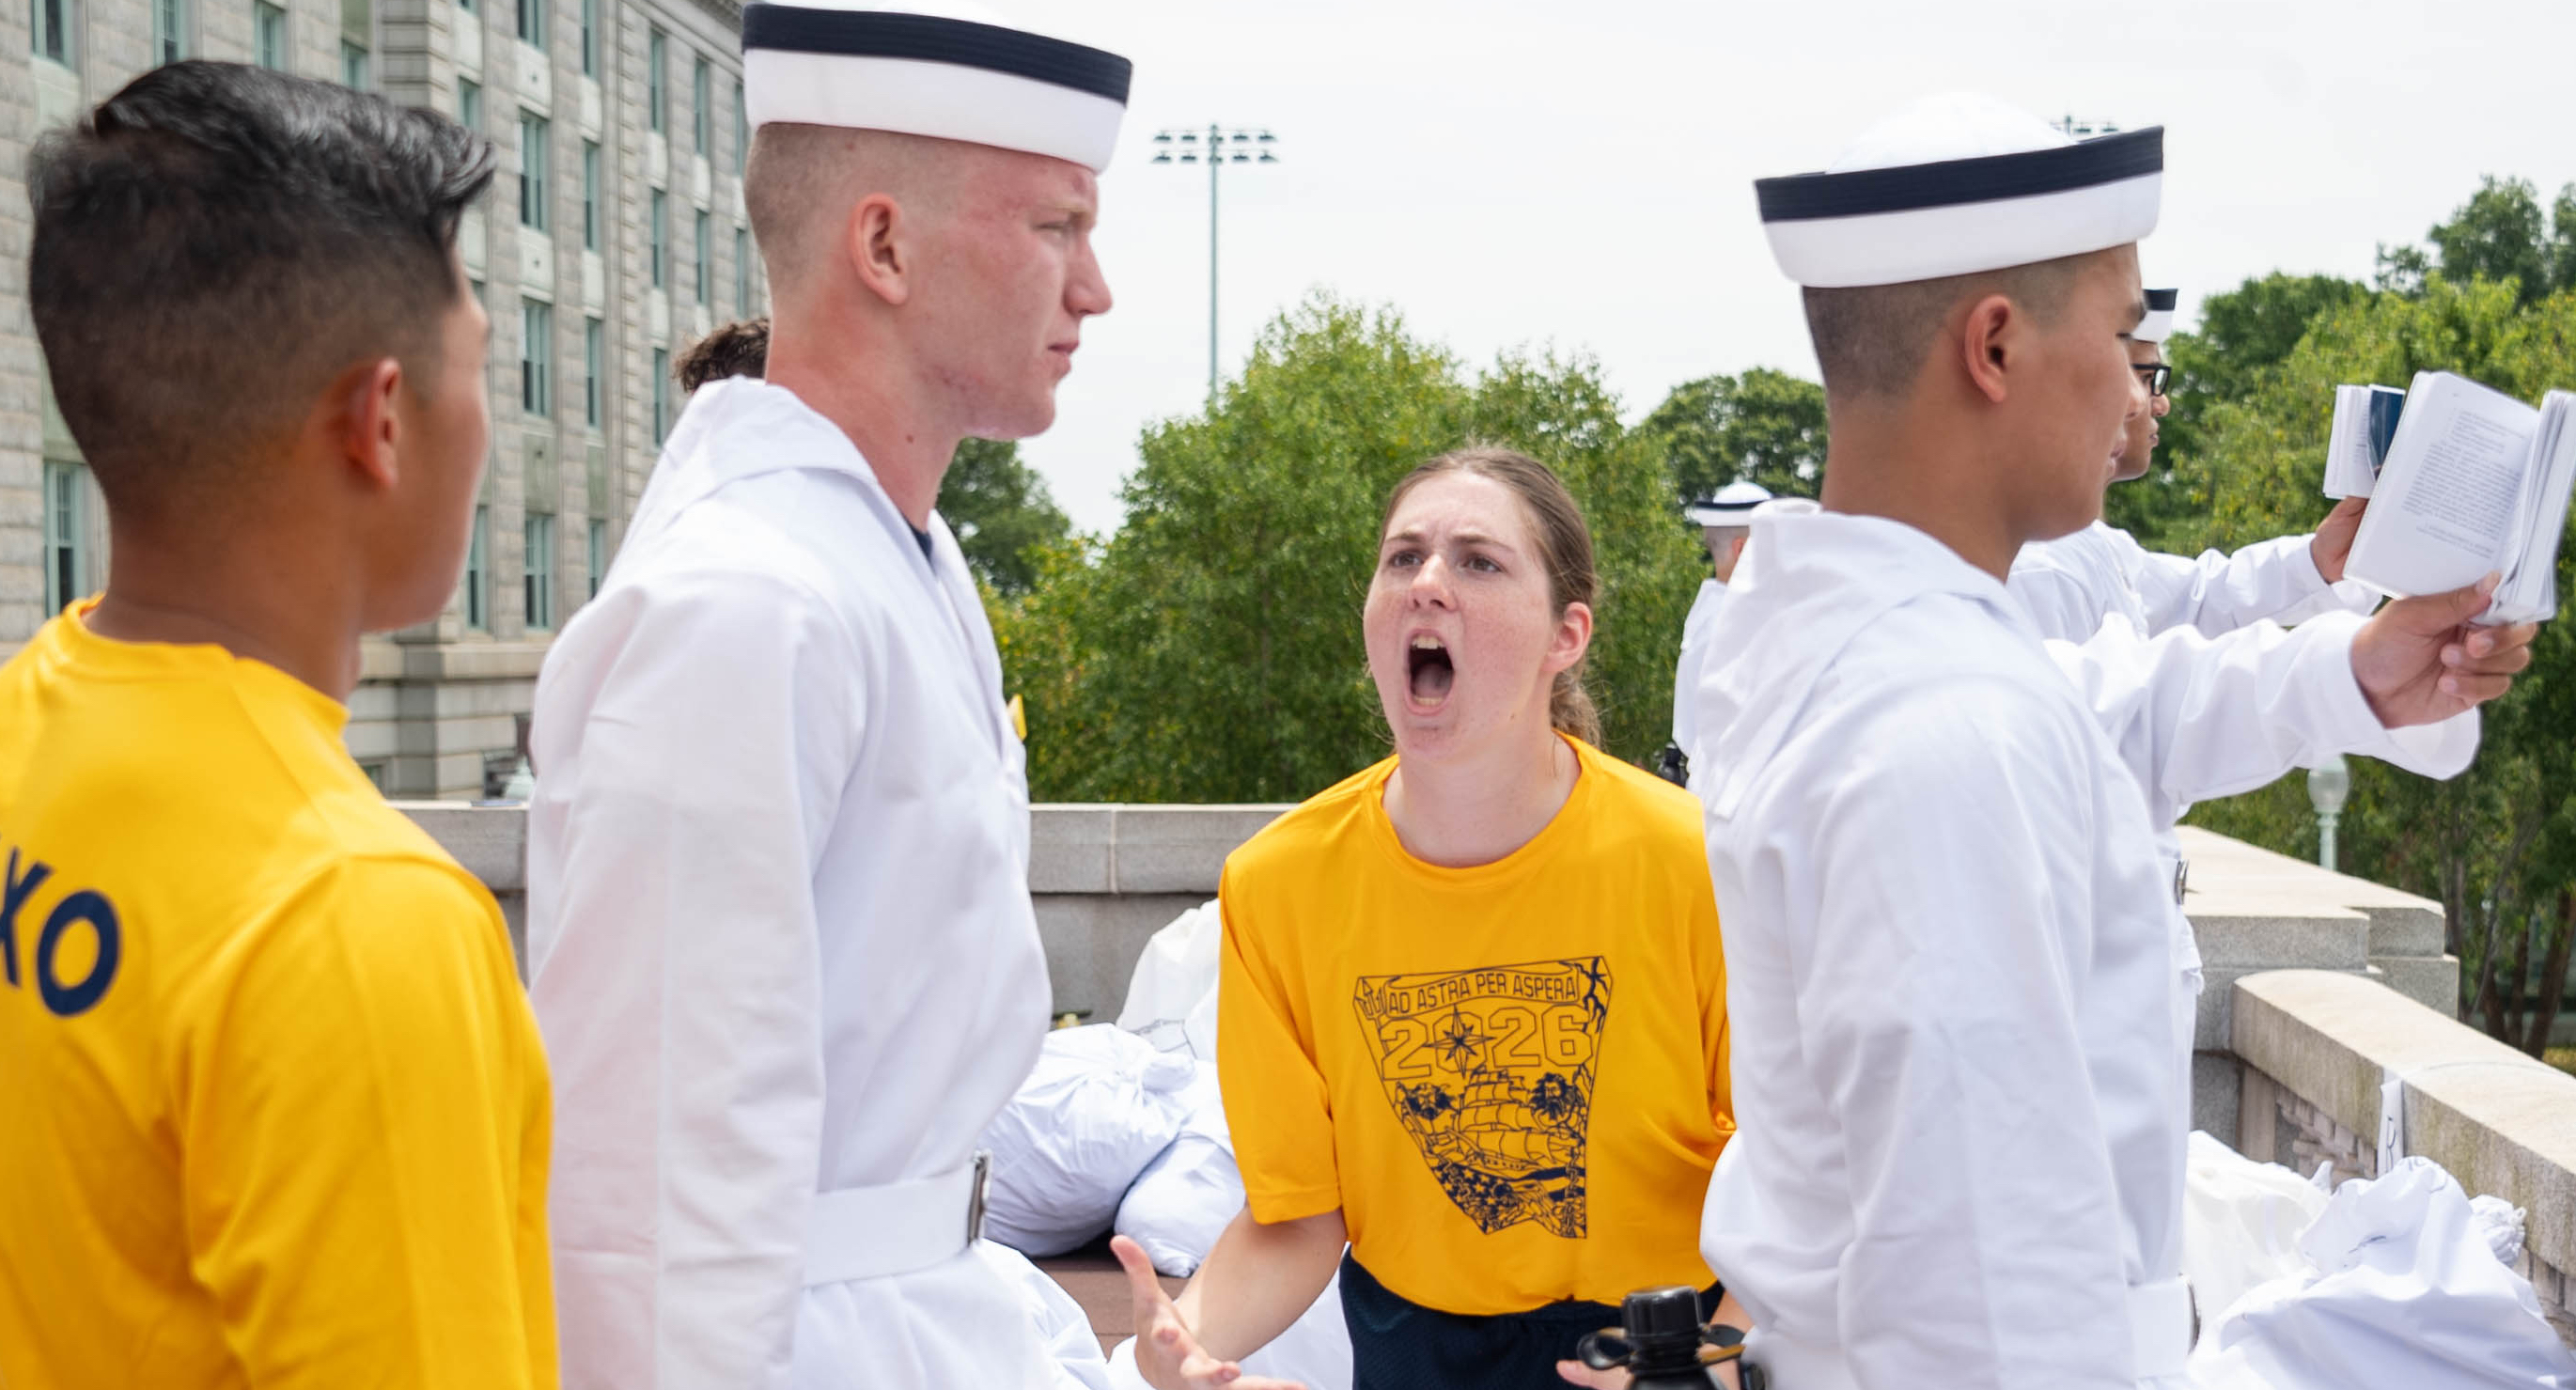 ANNAPOLIS, Md. (June 27, 2024) U.S. Naval Academy midshipman candidates, or plebes, of the class of 2028 receive instruction from detailers during I-Day which marks the beginning of a demanding six-week indoctrination period called Plebe Summer that is intended to transition the candidates from civilian to military life. As the undergraduate college of our country’s naval service, the Naval Academy prepares young men and women to become professional officers of competence, character, and compassion in the U.S. Navy and Marine Corps. (U.S. Navy photo by Stacy Godfrey) (This photo has been altered for security purposes by blurring out identification numbers.)